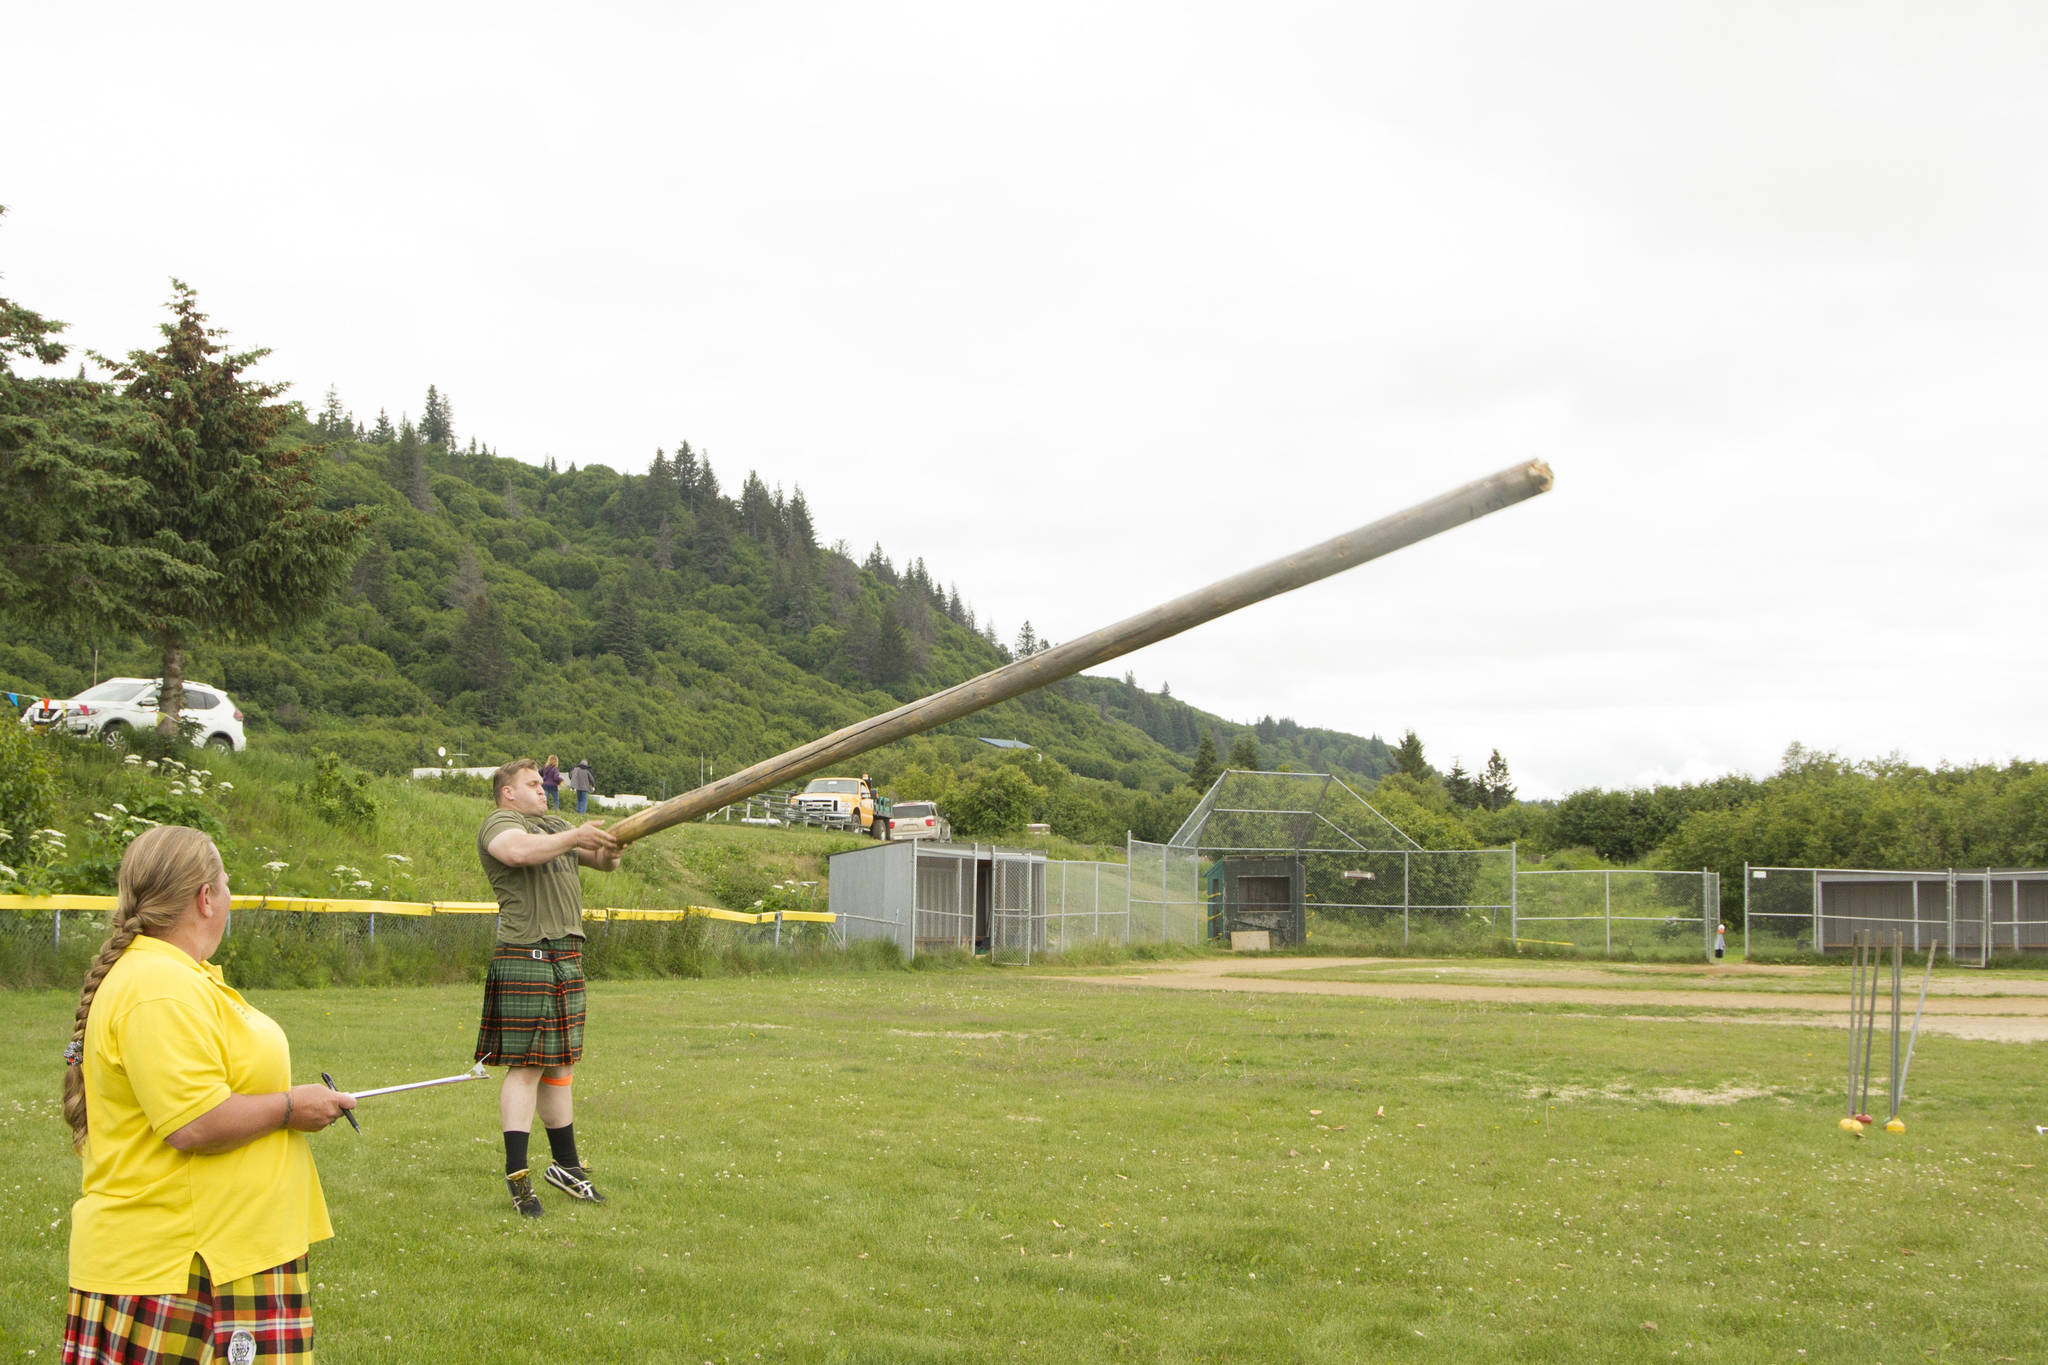 Athletes competed in the caber toss at the 2021 Kachemak Bay Highland Games on Saturday, July 3. (Photo by Sarah Knapp/Homer News)